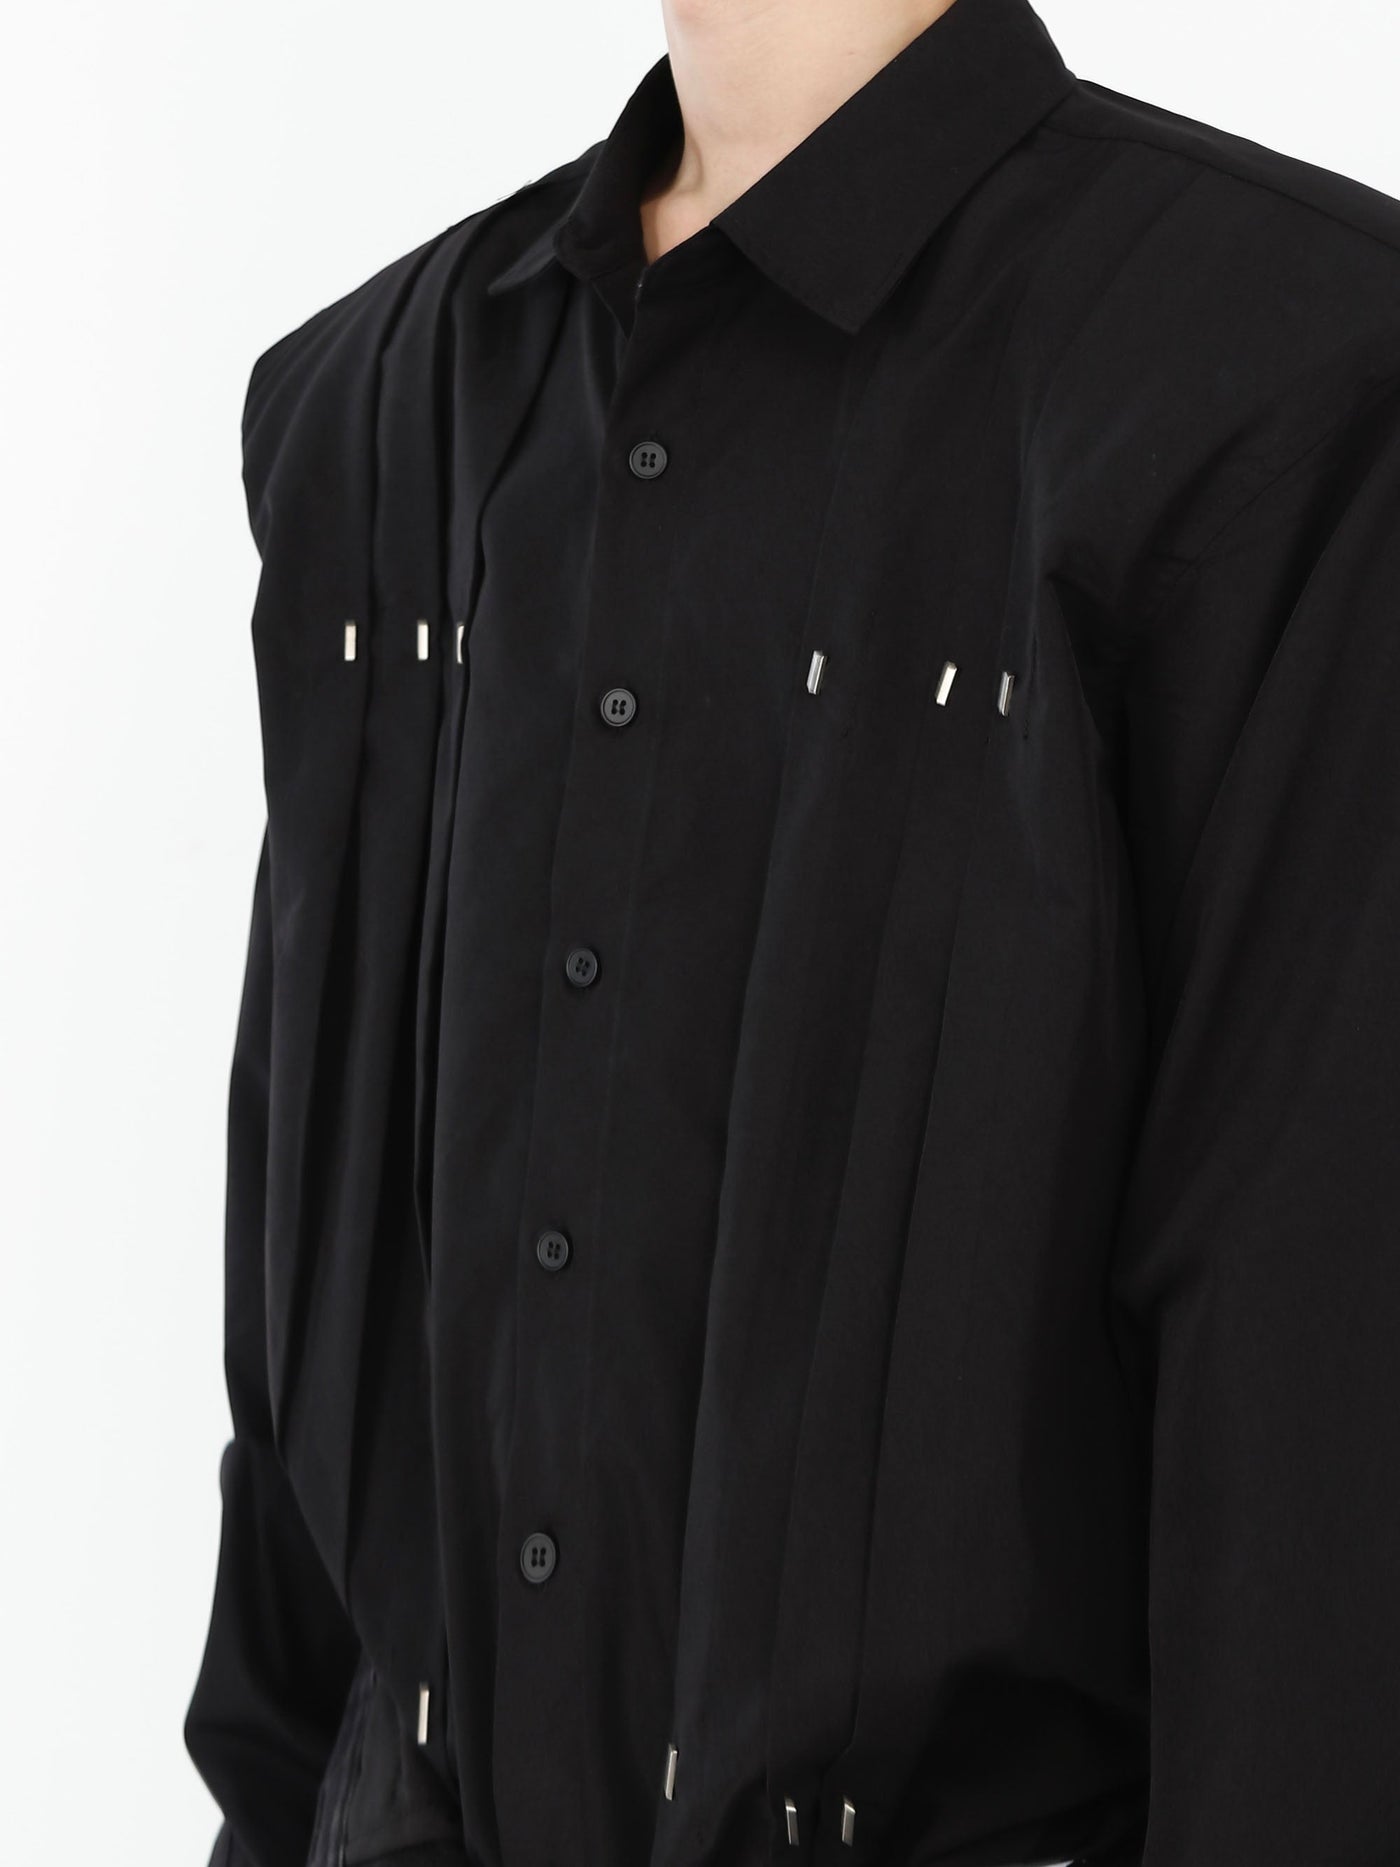 Metal Pleated Long Sleeve Shirt Korean Street Fashion Shirt By Argue Culture Shop Online at OH Vault